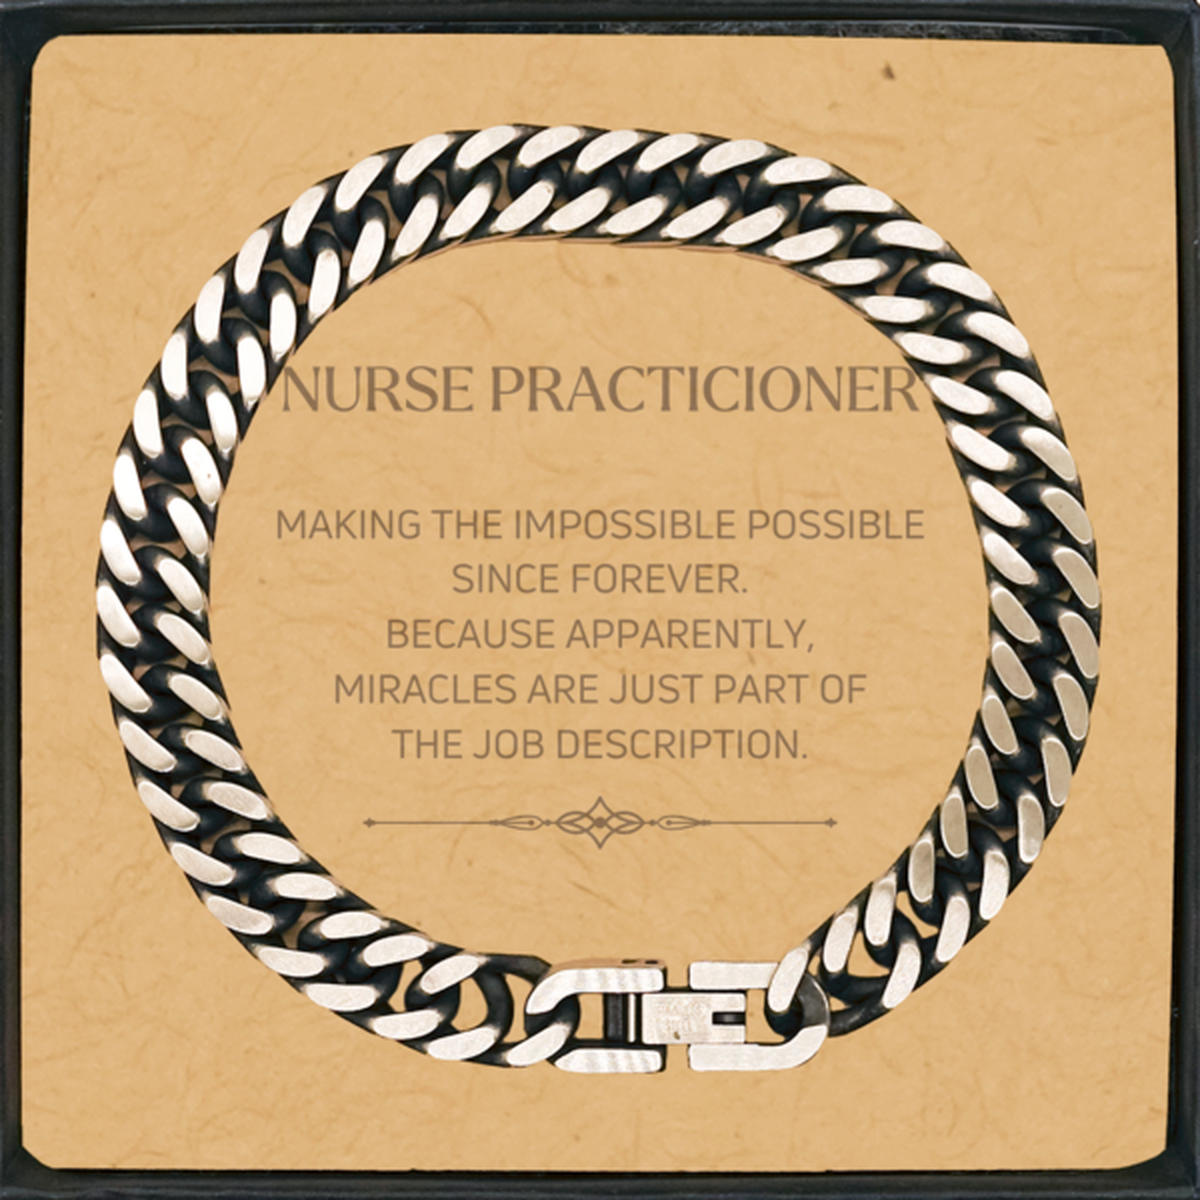 Funny Nurse Practicioner Gifts, Miracles are just part of the job description, Inspirational Birthday Cuban Link Chain Bracelet For Nurse Practicioner, Men, Women, Coworkers, Friends, Boss